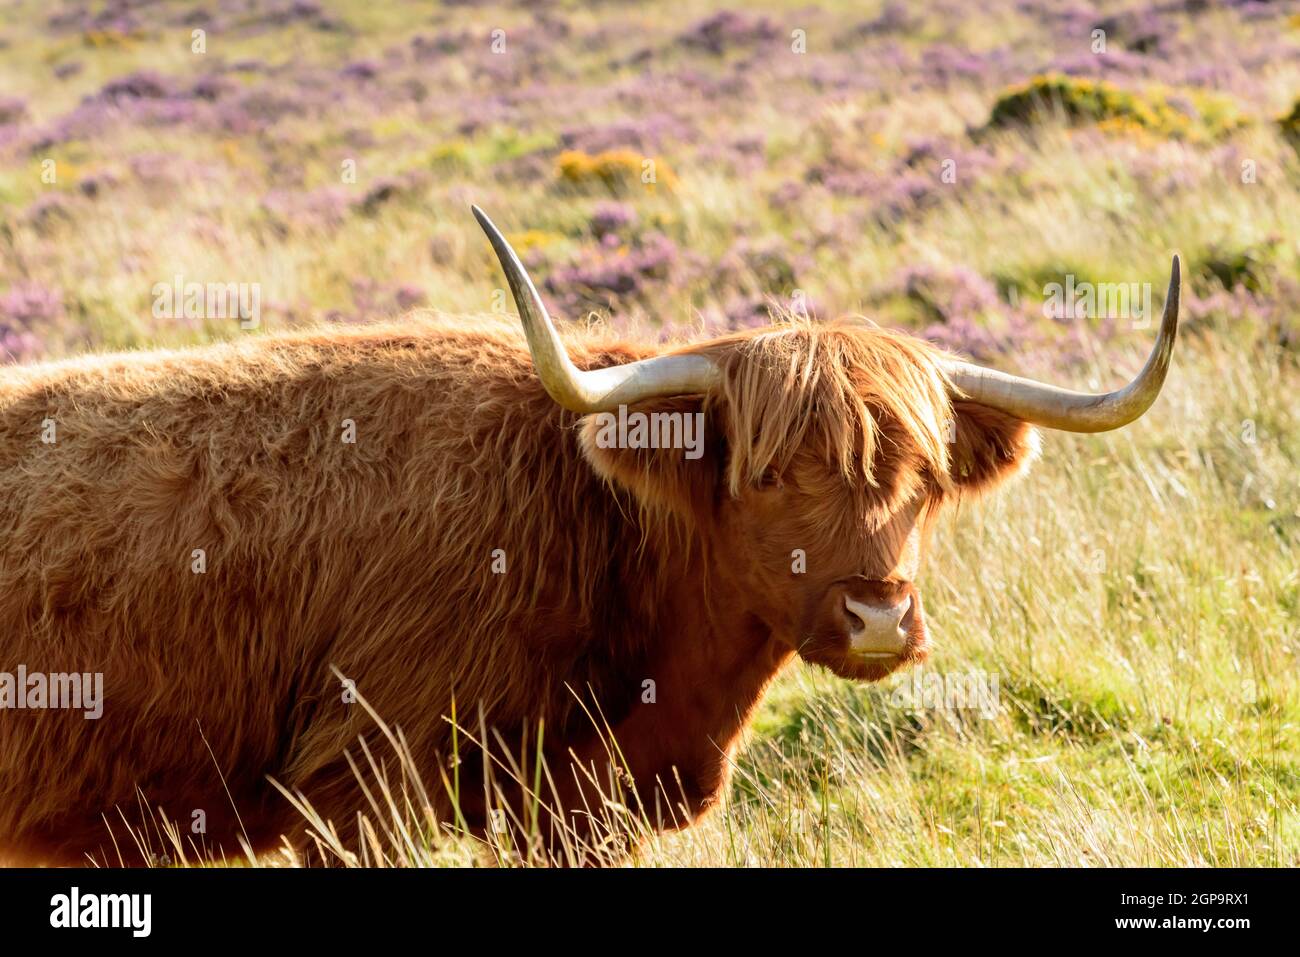 muzzle and long horns of hairy cattle grazing among heather bush in the moor Stock Photo